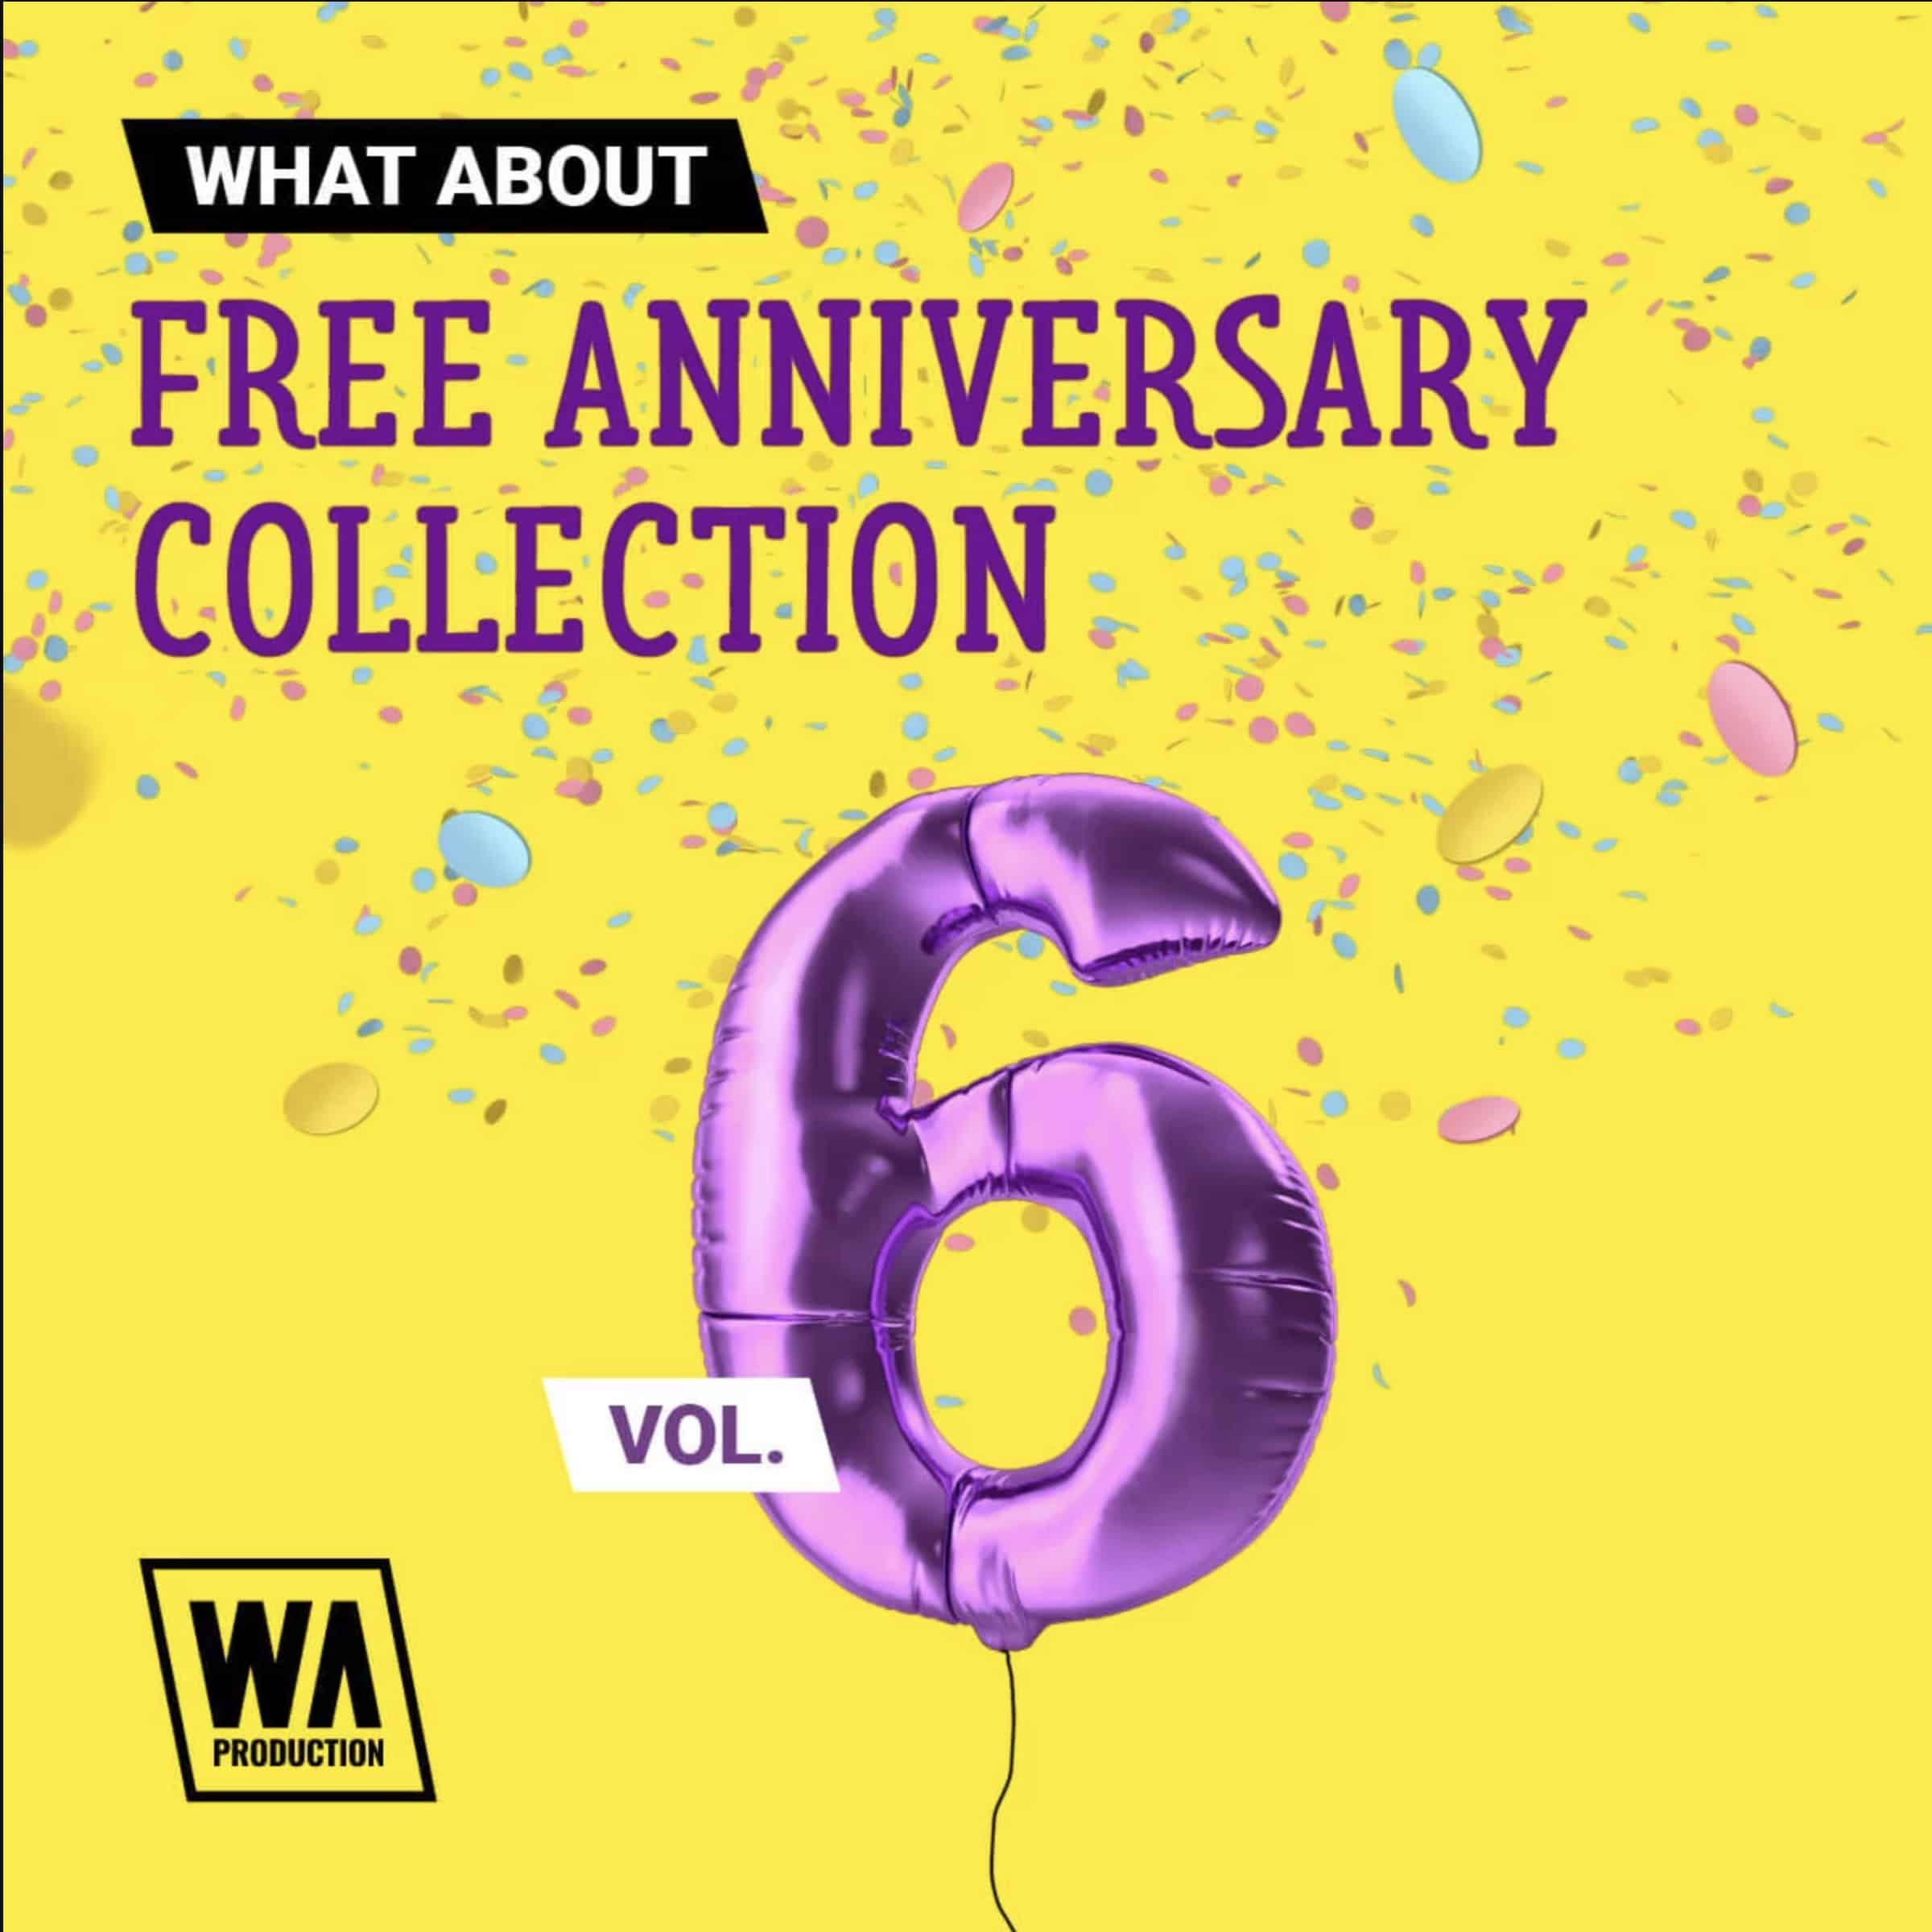 Free Anniversary Collection Volume 6 from W. A. Production